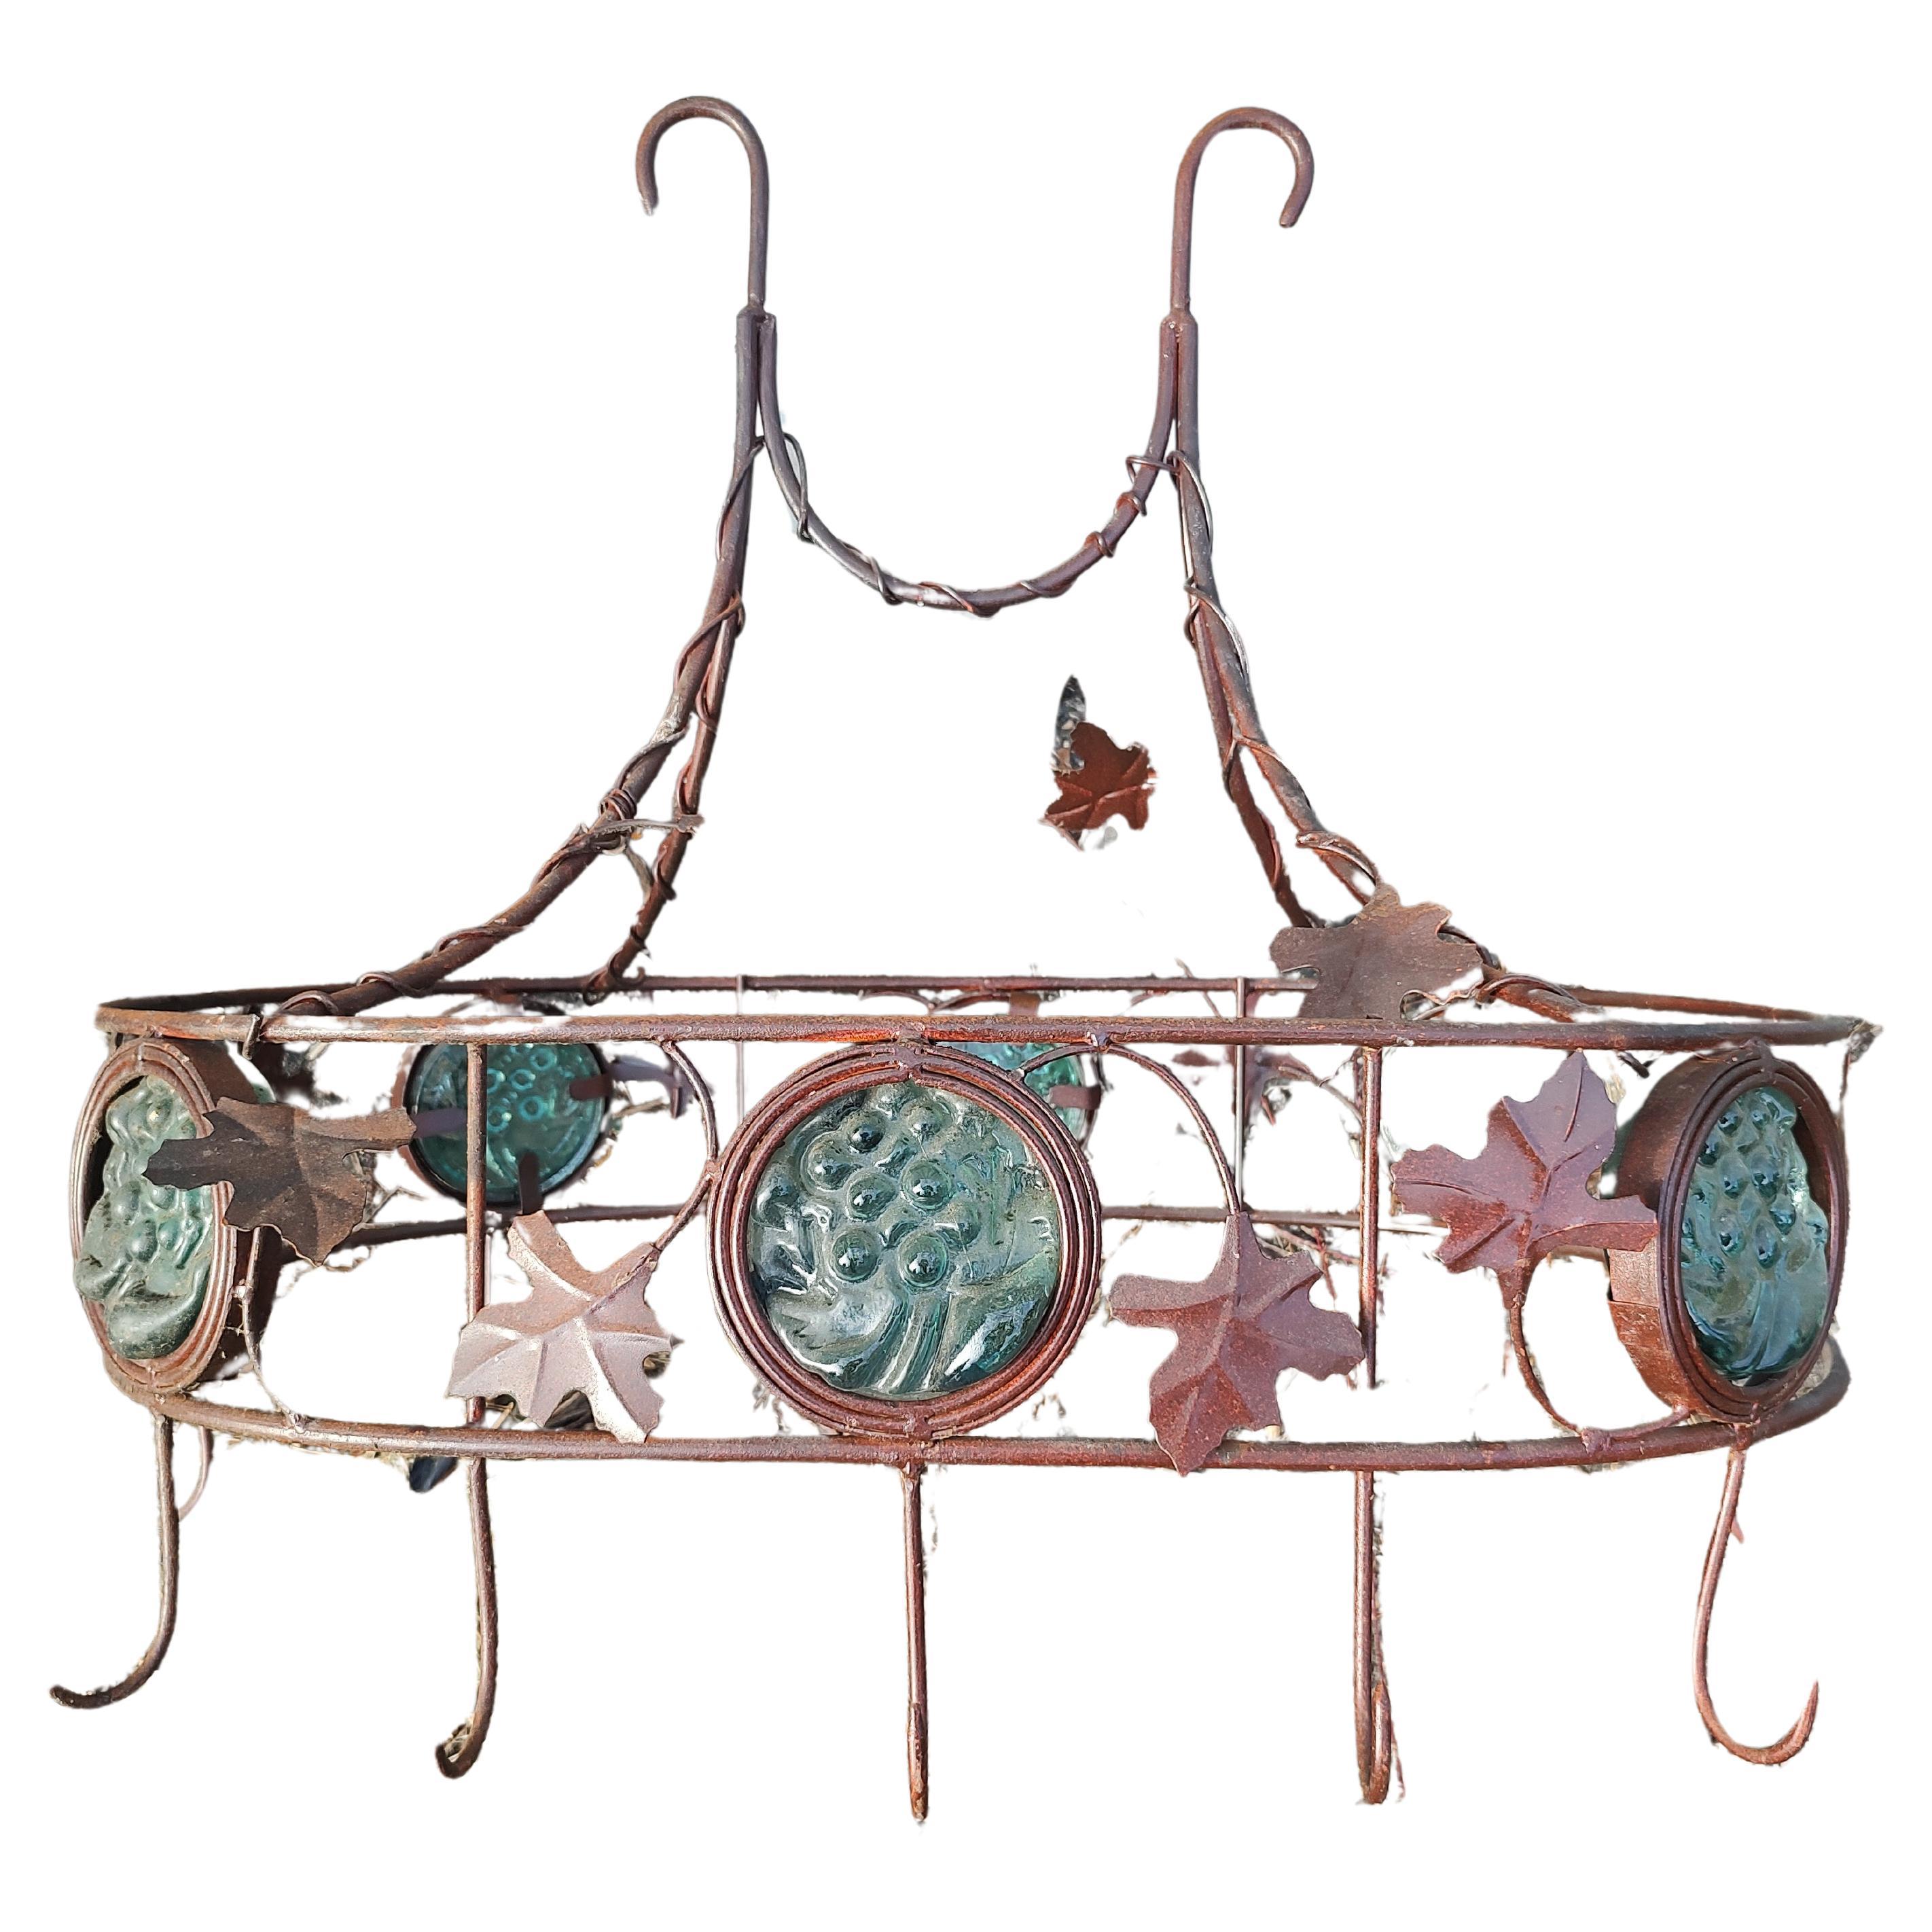 Wrought Iron with Decorative Stained Glass Panels Hanging Pot Rack In Good Condition For Sale In Port Jervis, NY